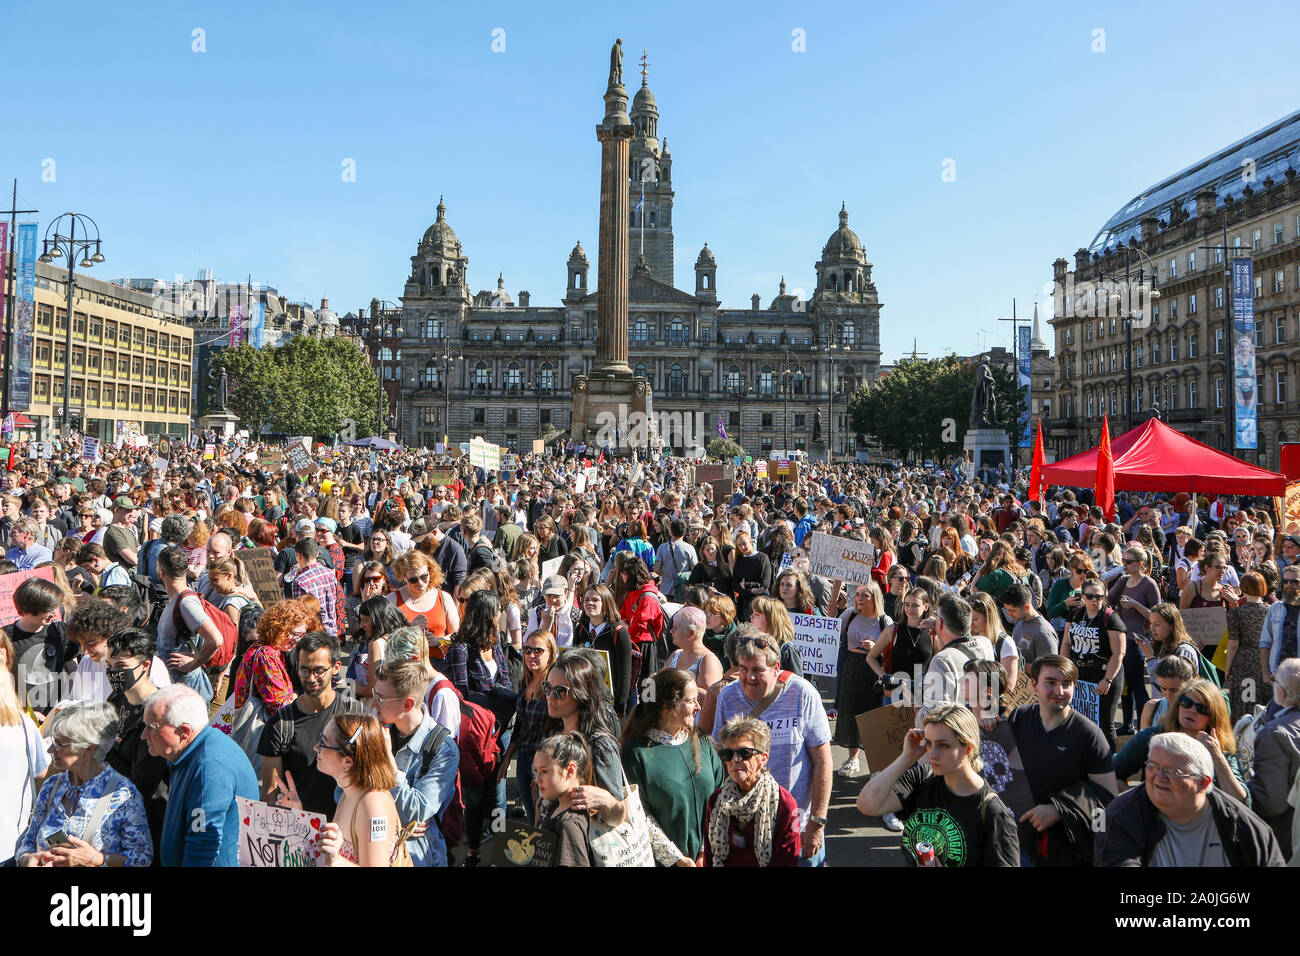 Glasgow, UK. 20 September 2019. Several thousand turned out to take part in the 'Scottish Youth Climate Strikers' march from Kelvingrove Park, through the city to an assembly in George Square to draw attention to the need for action against climate change. This parade was only one of a number  that were taking place across the United Kingdom as part of a coordinated day of action. Credit: Findlay / Alamy News. Stock Photo